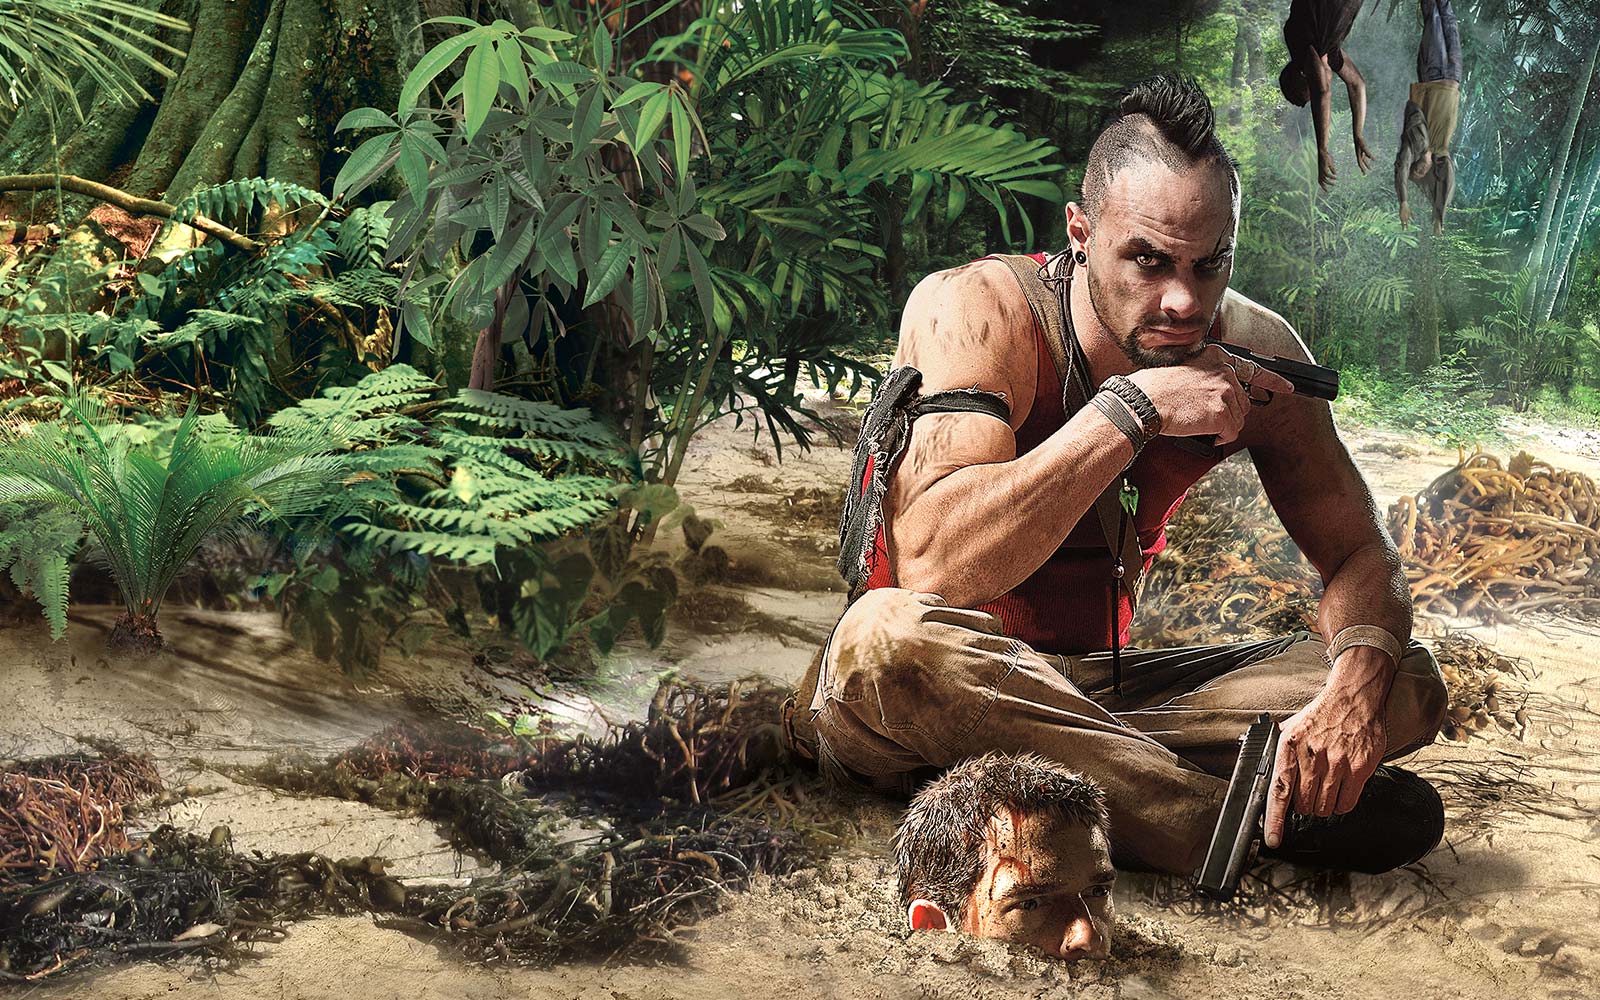 Far Cry 3 is free on the Ubisoft store, but for a limited time only